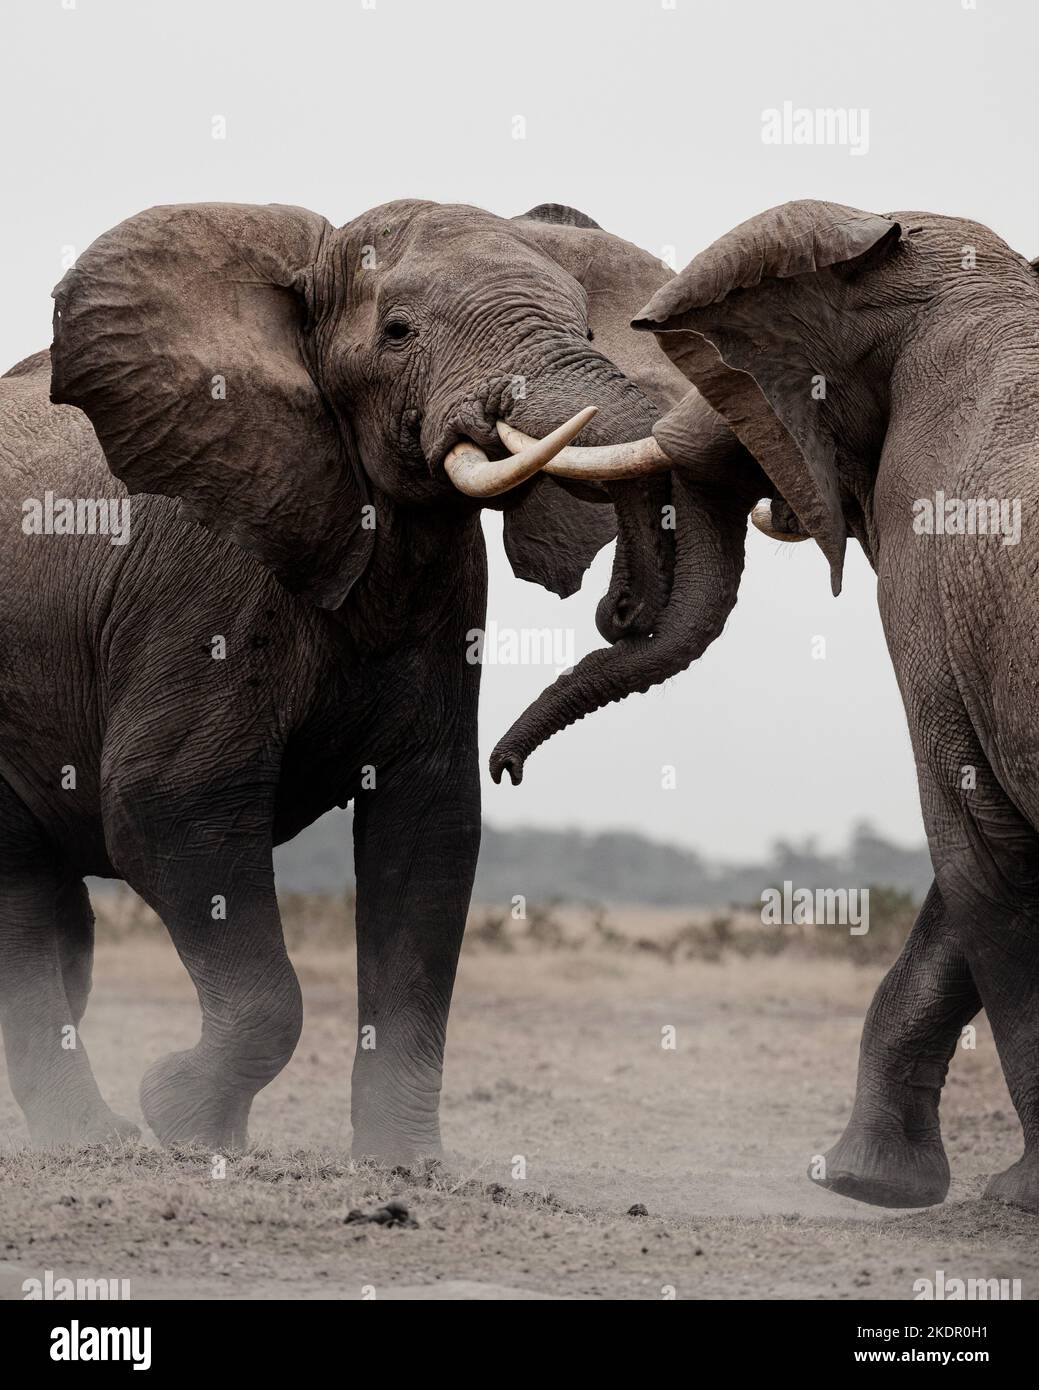 The elephants clash tusks. Kenya: THESE INCREDIBLE images show two elephants locked together in battle by twisting their trunks around one another in Stock Photo